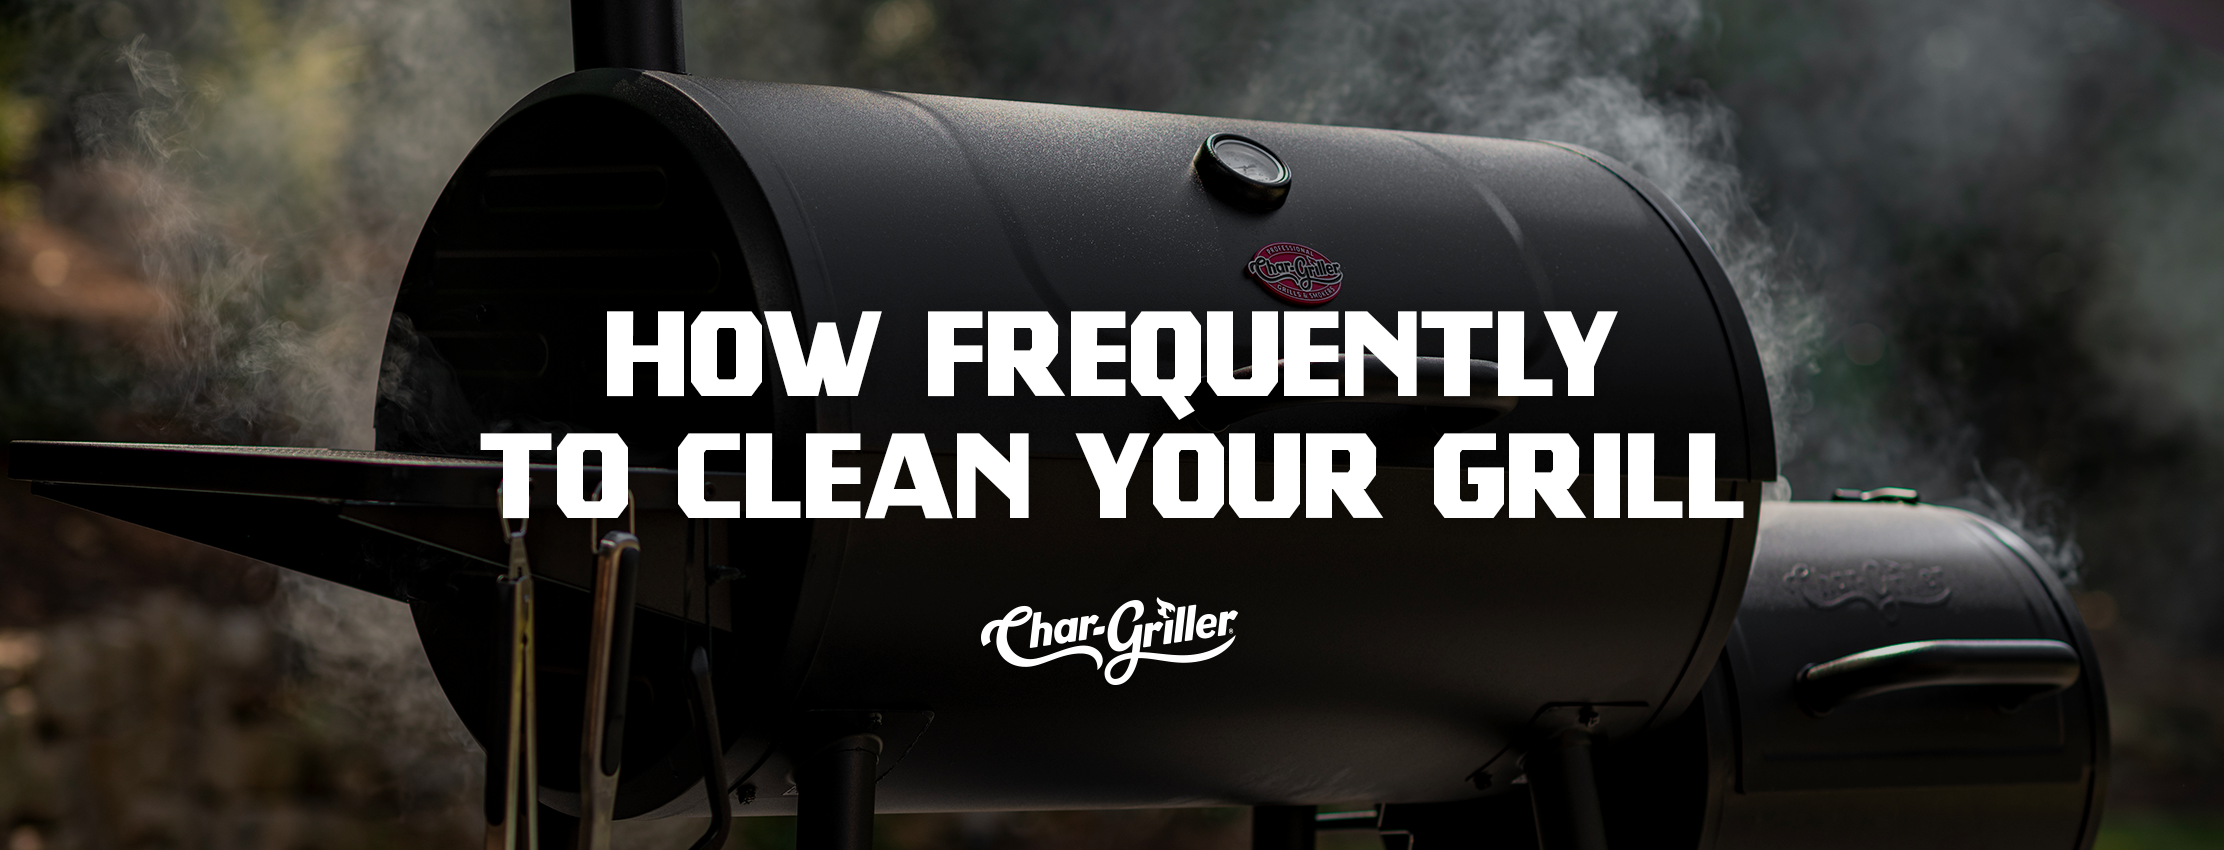 Grill Cleaning Service